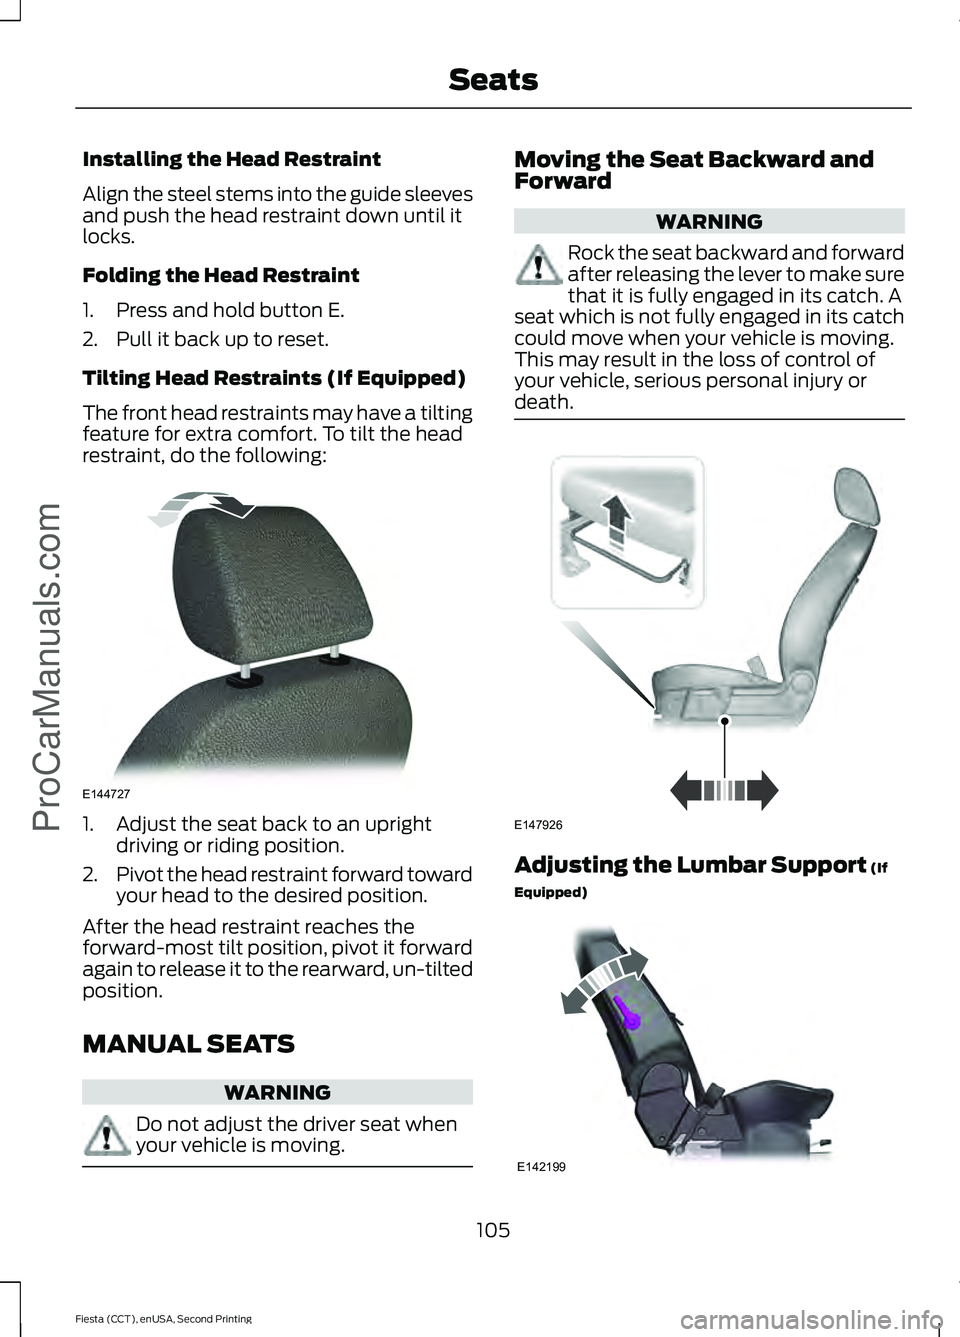 FORD FIESTA 2015  Owners Manual Installing the Head Restraint
Align the steel stems into the guide sleeves
and push the head restraint down until it
locks.
Folding the Head Restraint
1. Press and hold button E.
2. Pull it back up to